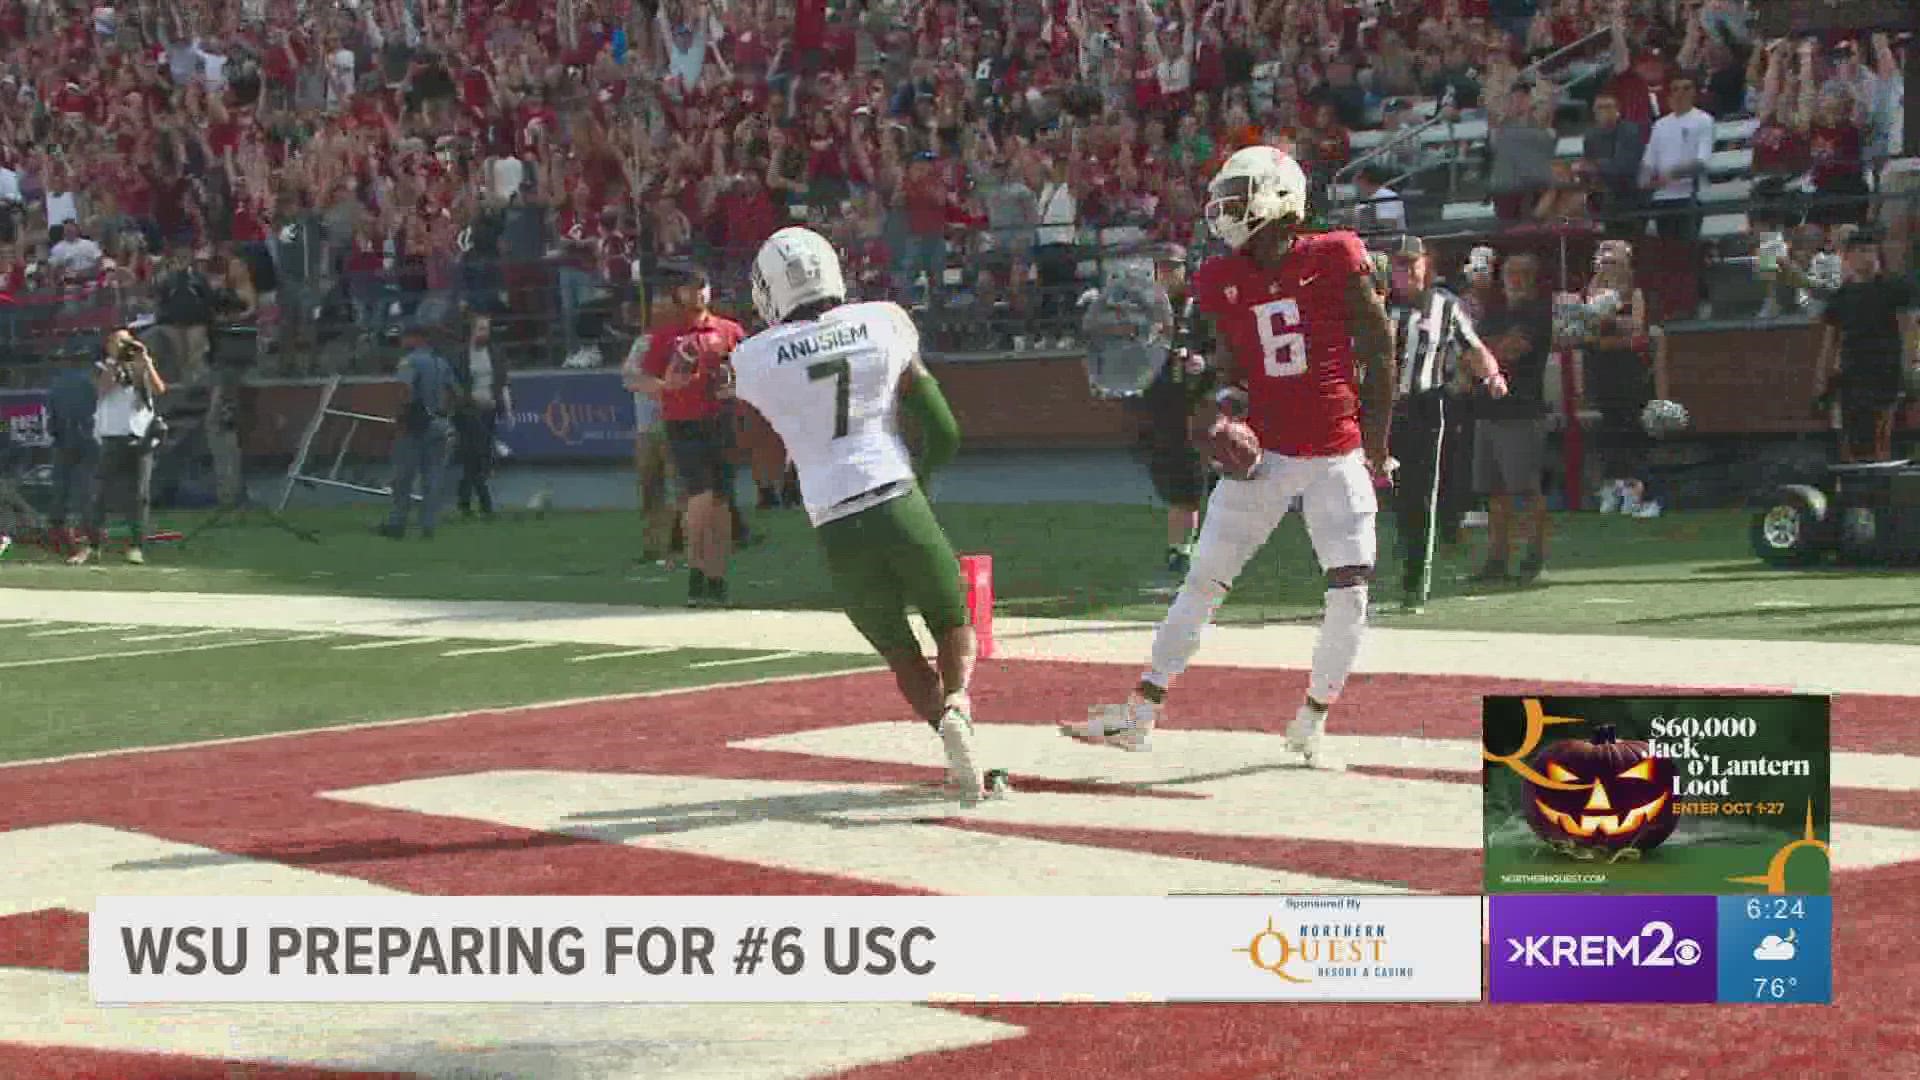 Coming off a big win against Cal, the Cougs are looking ahead to a challenging matchup against No. 6 ranked USC.